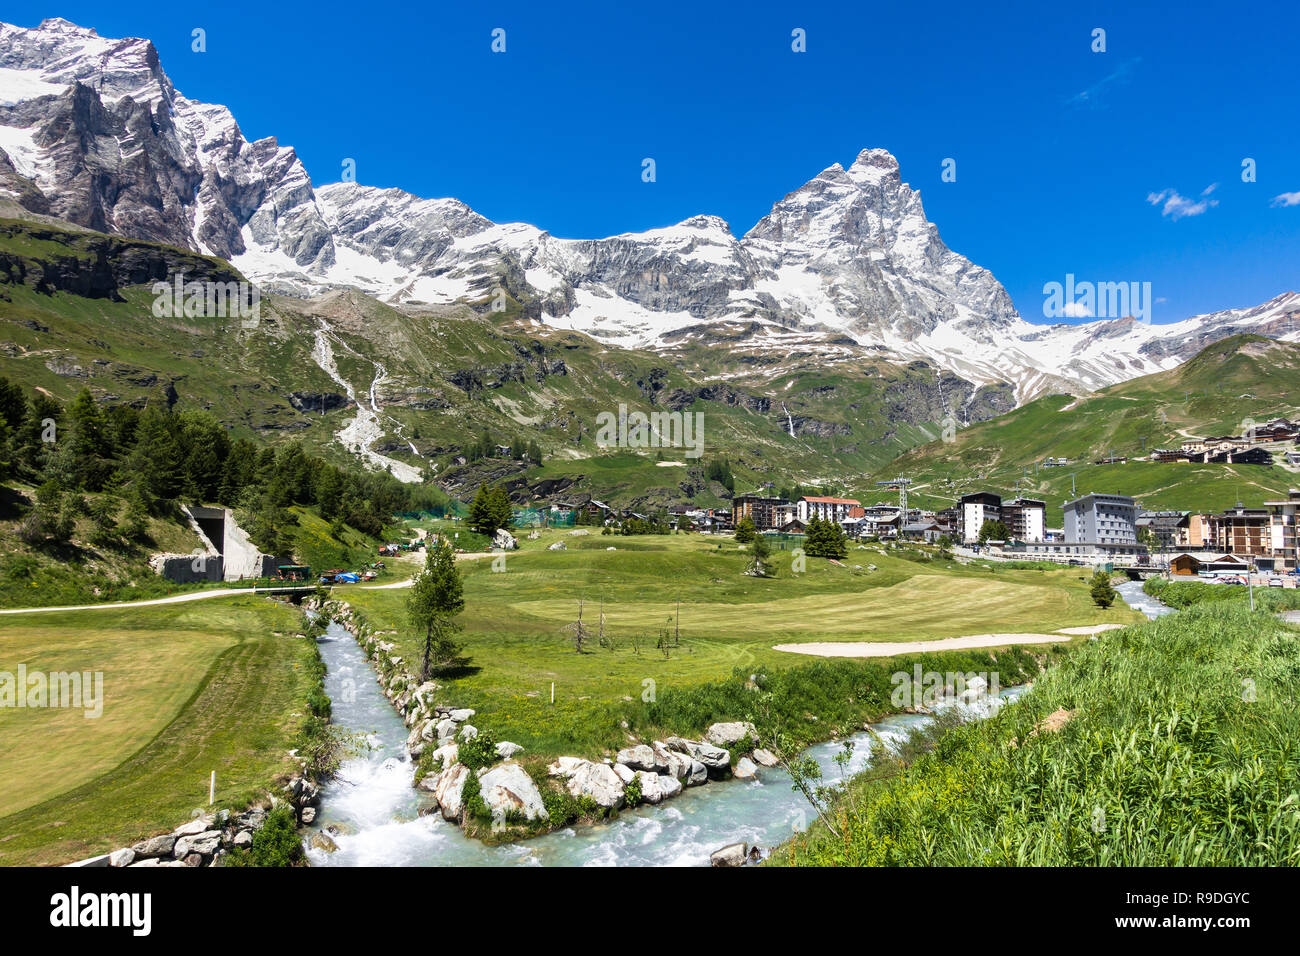 Summer panorama of Breuil-Cervinia an alpine resort town at the foot of the  Matterhorn (Cervino), Aosta Valley, northern Italy Stock Photo - Alamy